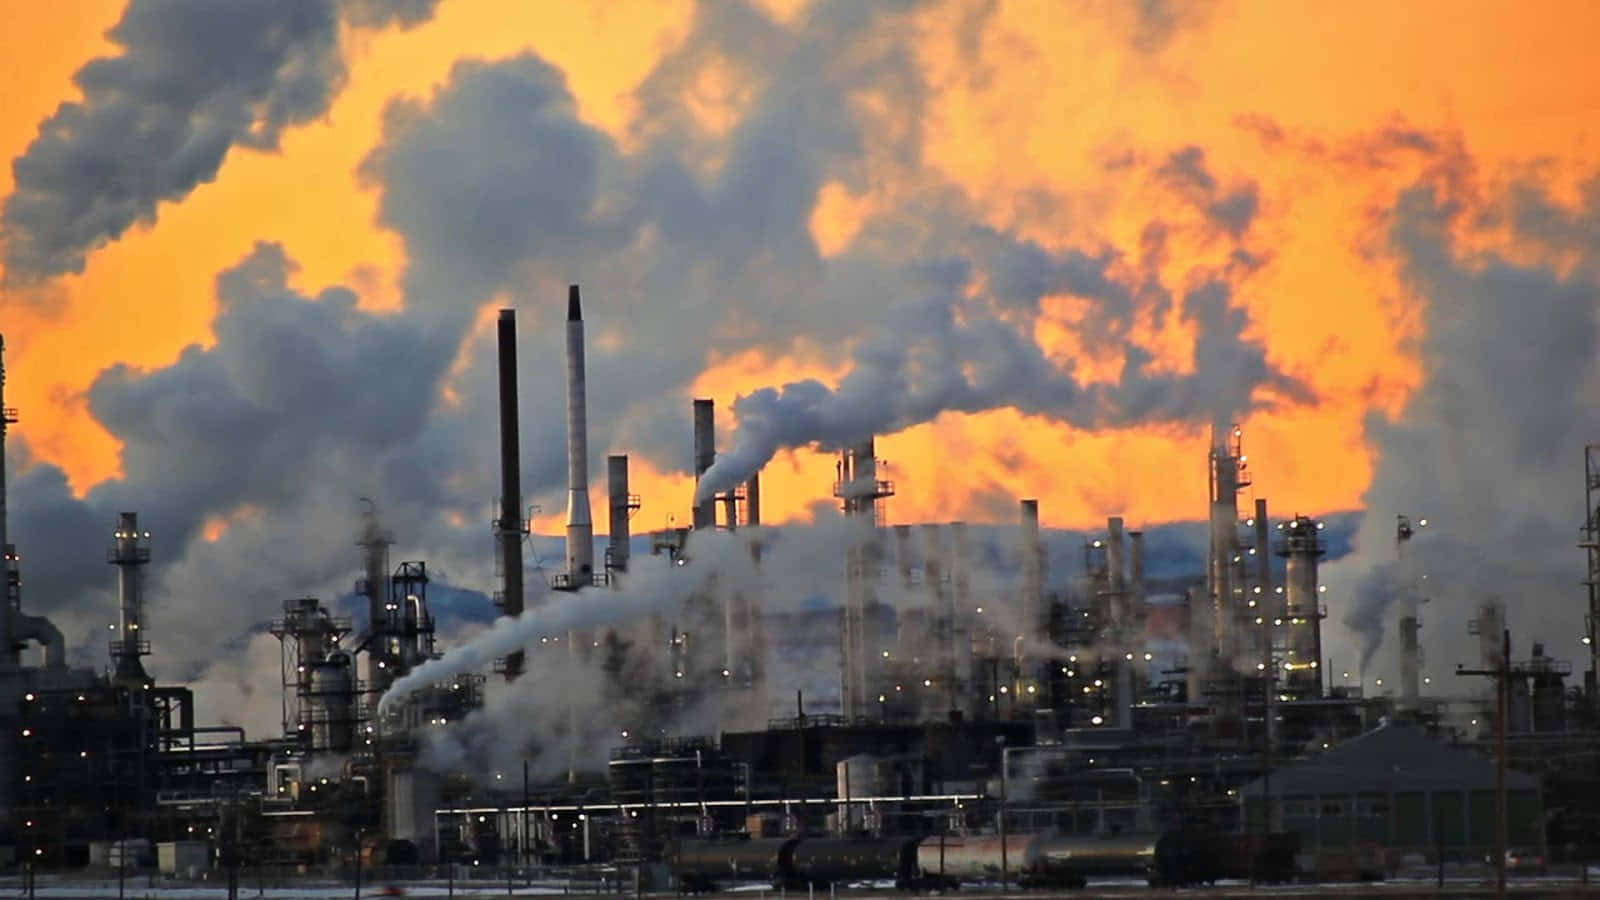 A Refinery With Smoke Coming Out Of It